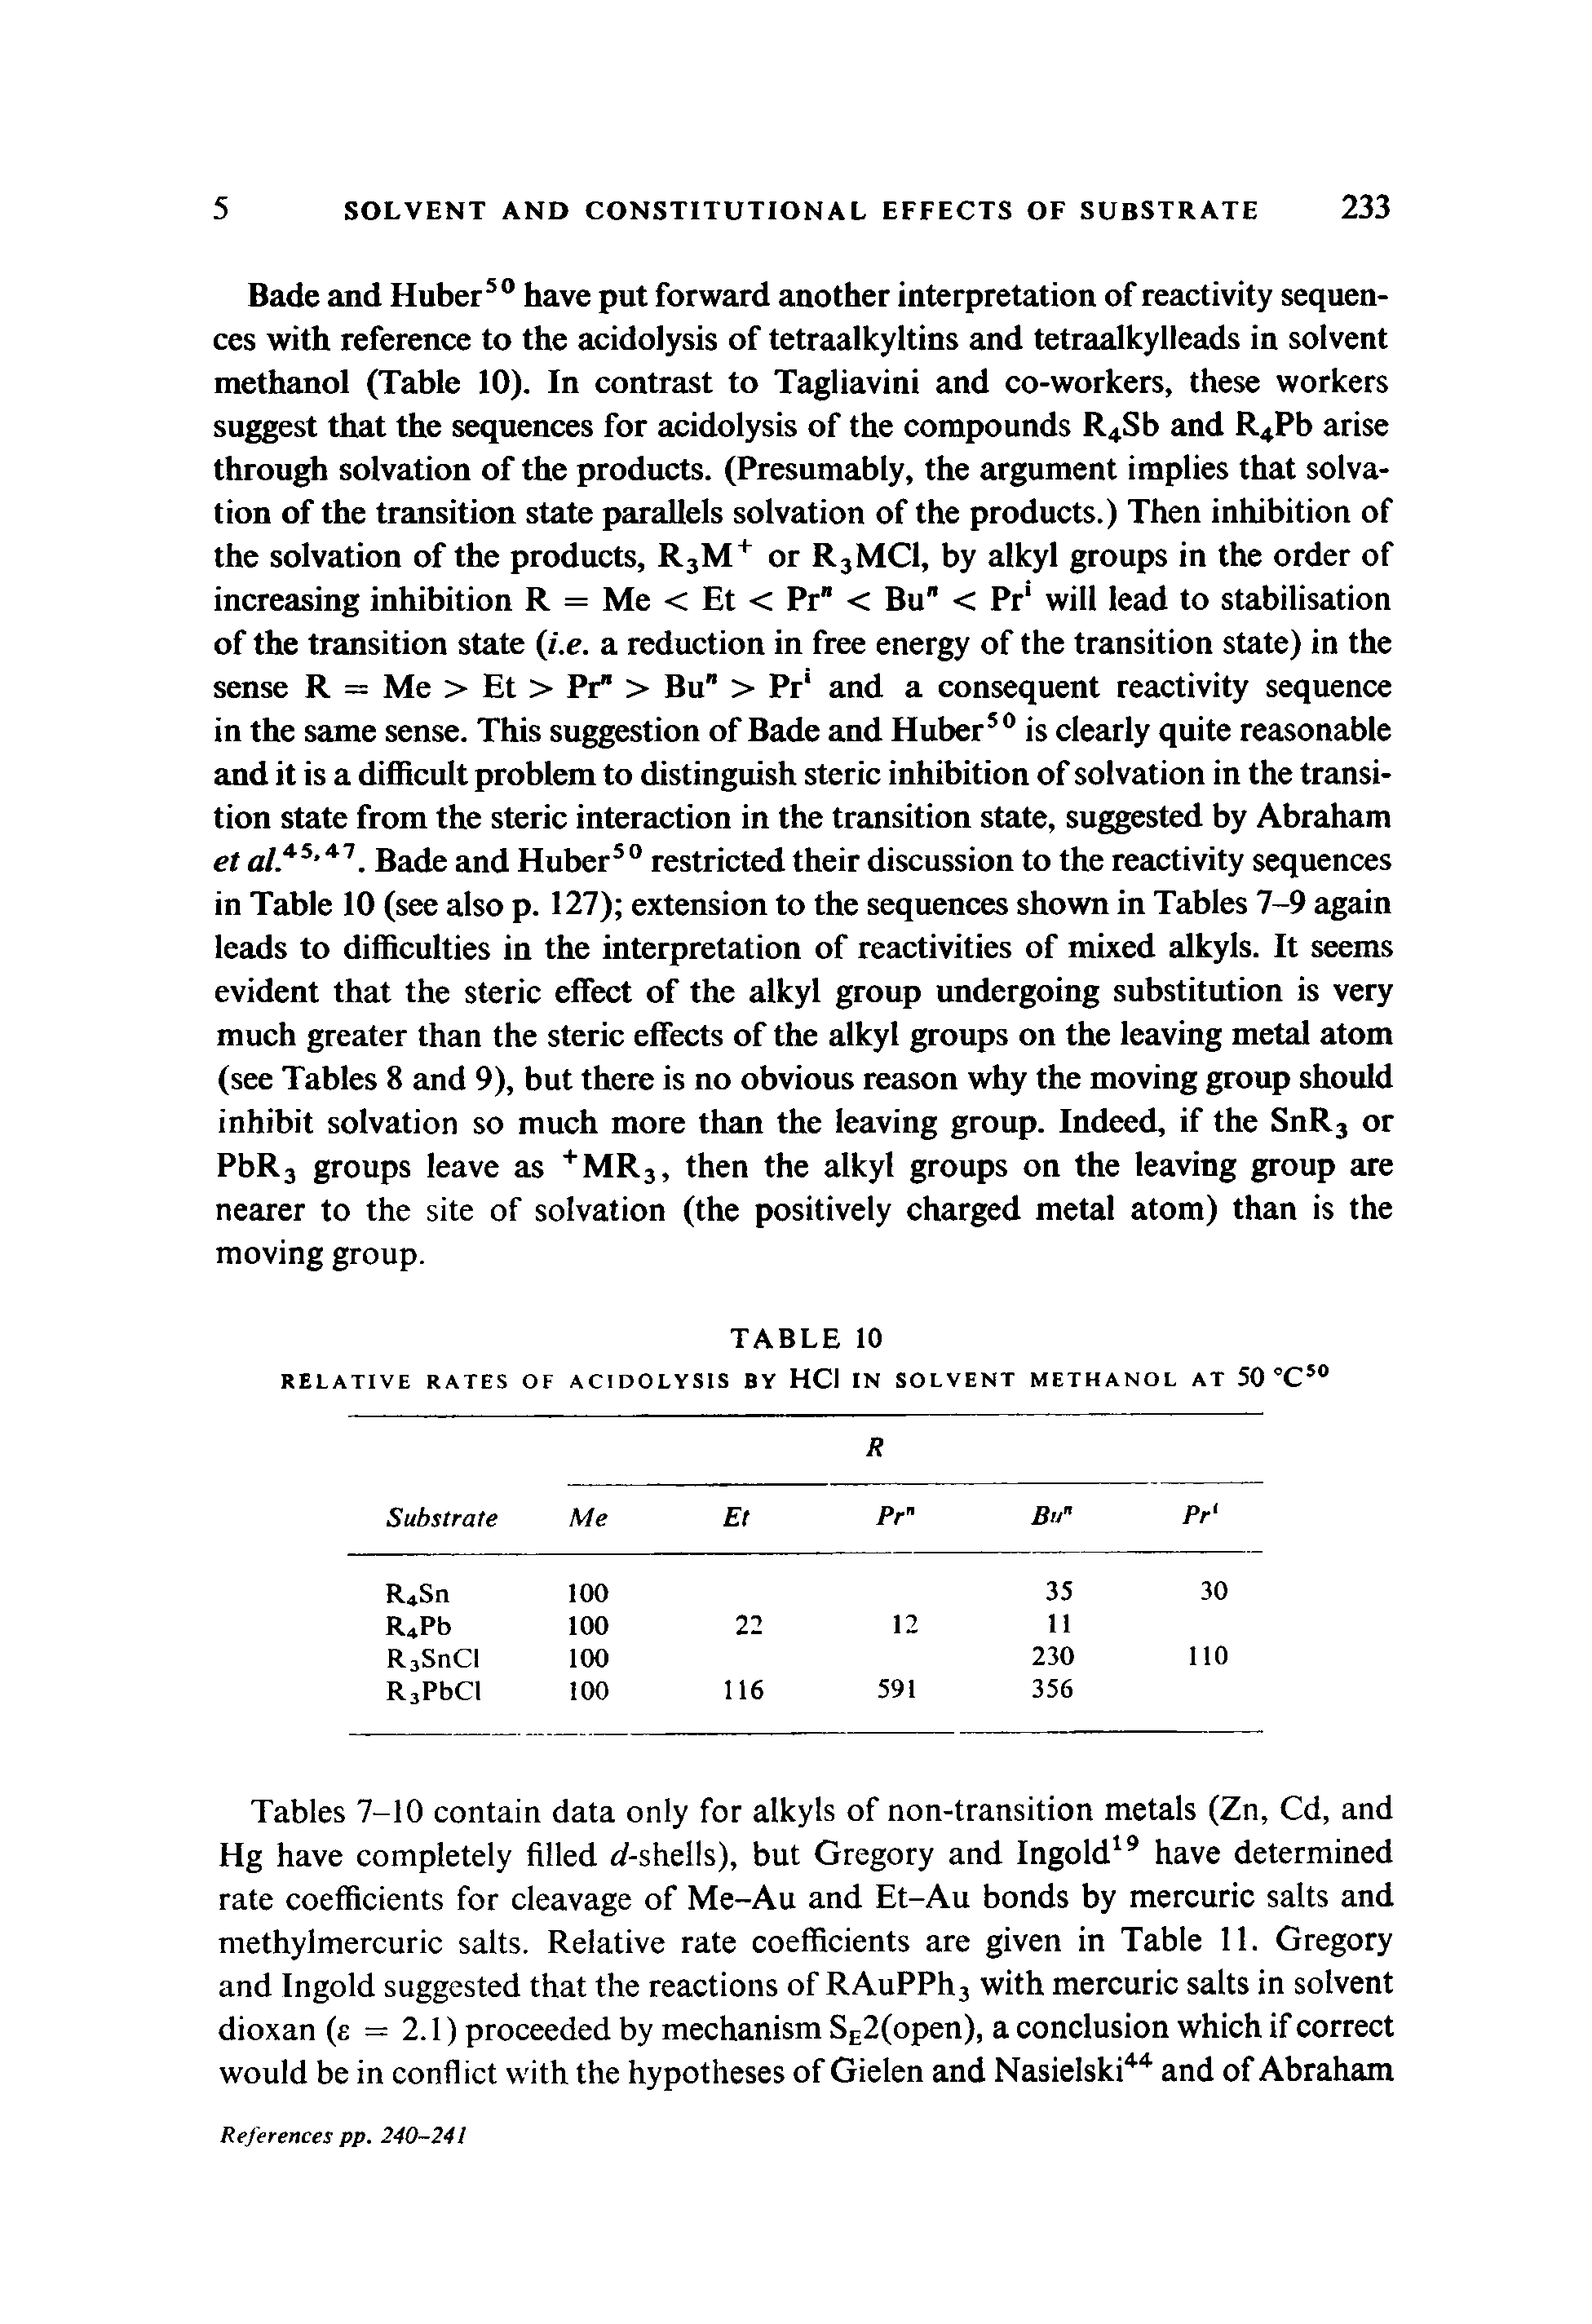 Tables 7-10 contain data only for alkyls of non-transition metals (Zn, Cd, and Hg have completely filled -shells), but Gregory and Ingold19 have determined rate coefficients for cleavage of Me-Au and Et-Au bonds by mercuric salts and methylmercuric salts. Relative rate coefficients are given in Table 11. Gregory and Ingold suggested that the reactions of RAuPPh3 with mercuric salts in solvent dioxan (e = 2.1) proceeded by mechanism SE2(open), a conclusion which if correct would be in conflict with the hypotheses of Gielen and Nasielski44 and of Abraham...